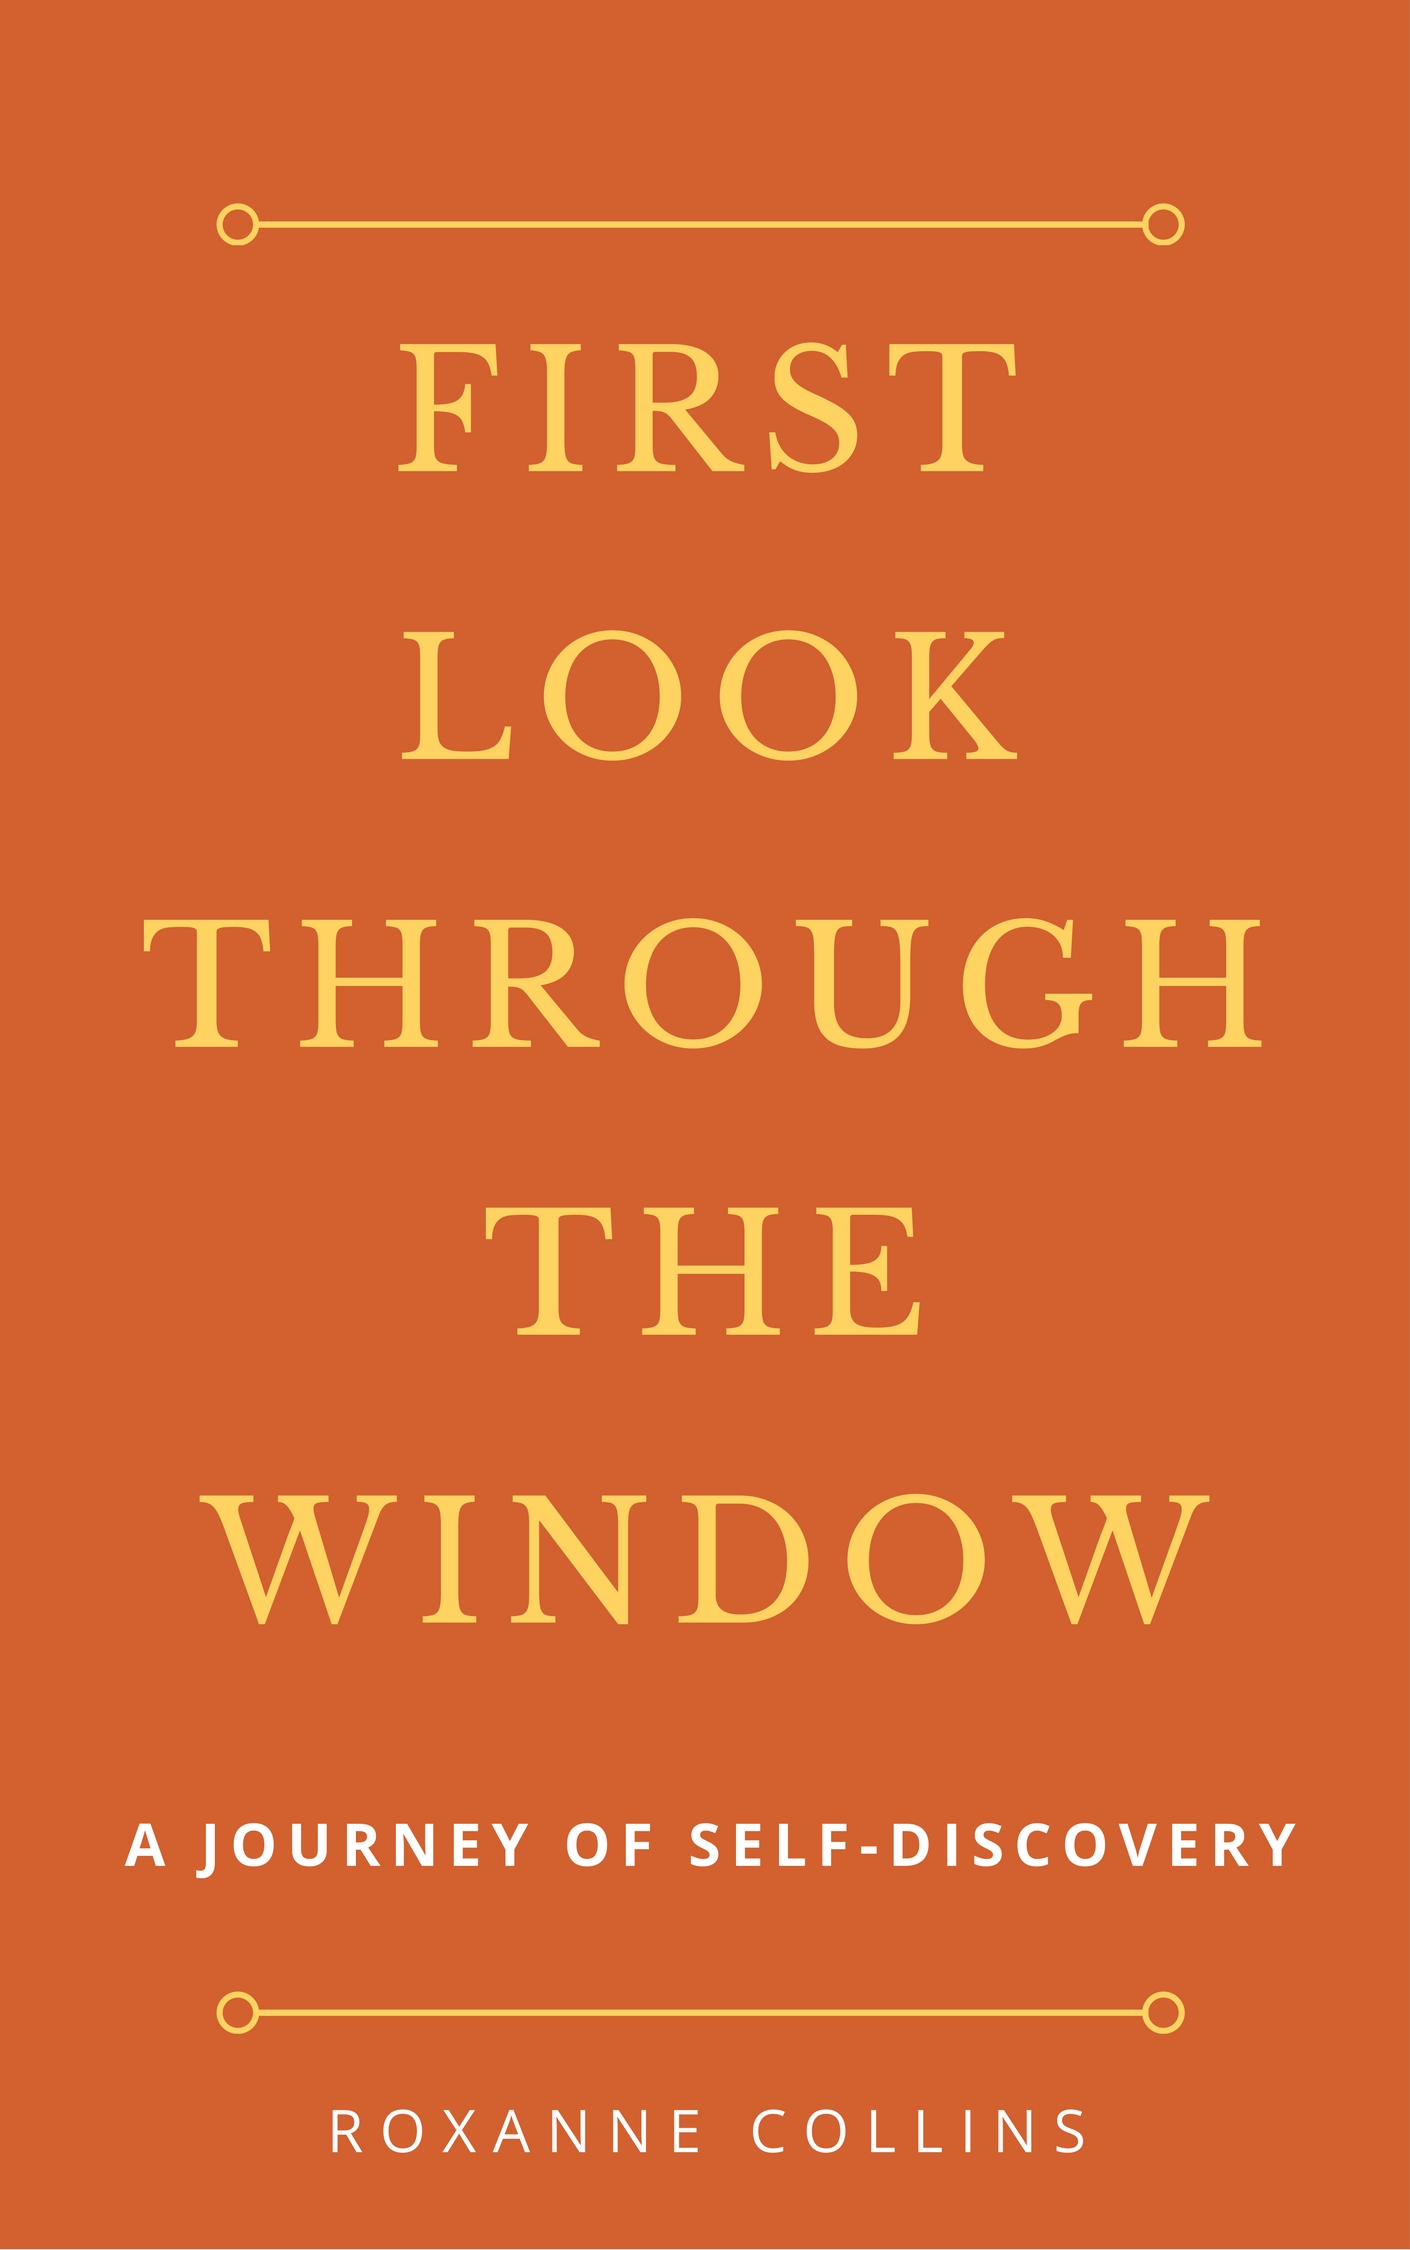 FREE: First Look Through the Window: A Journey of Self-Discovery by Roxanne Collins